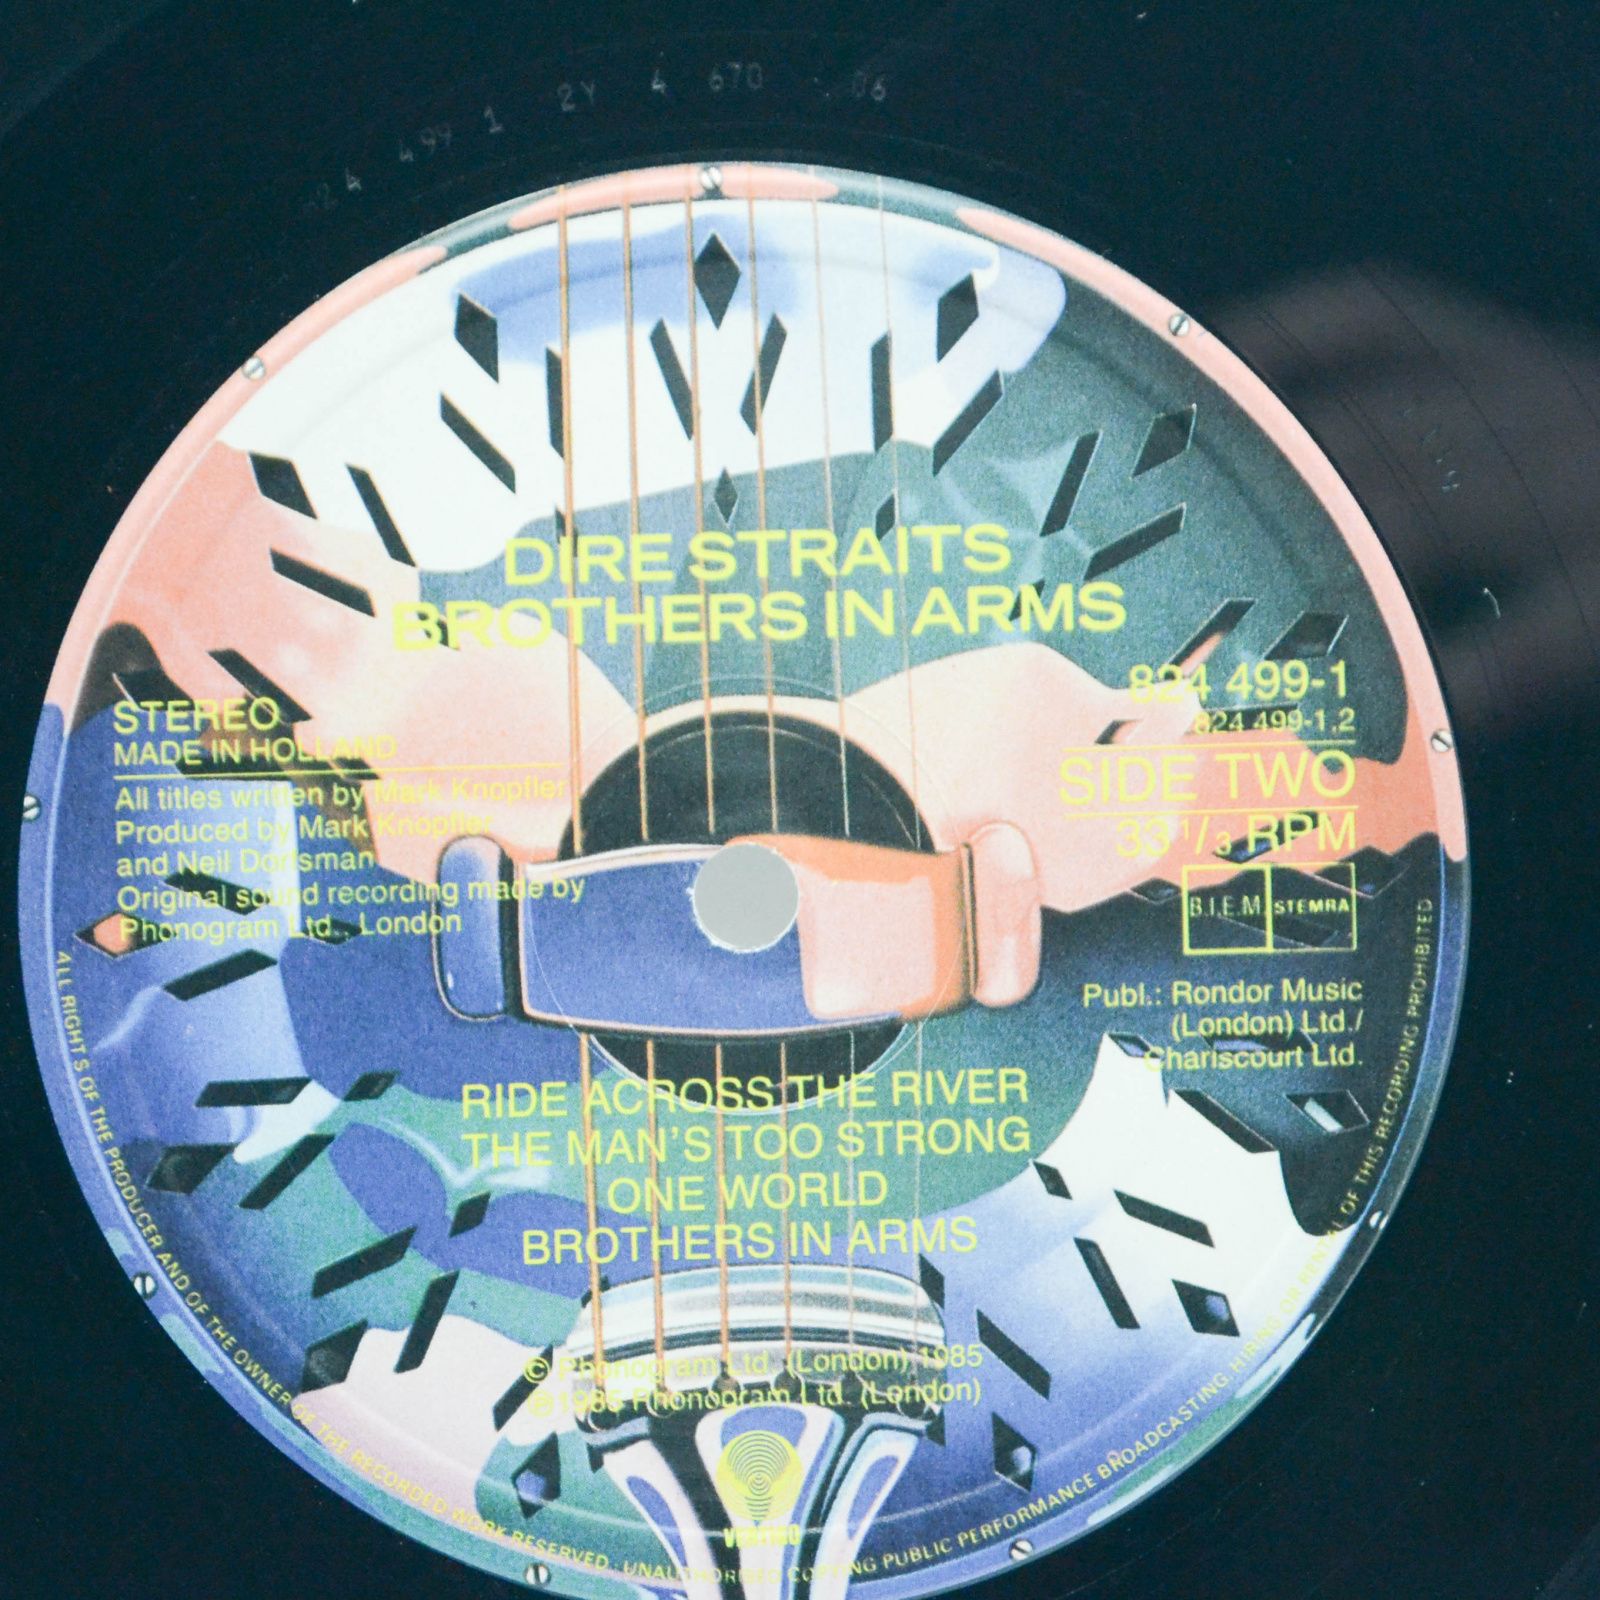 Dire Straits — Brothers In Arms, 1985